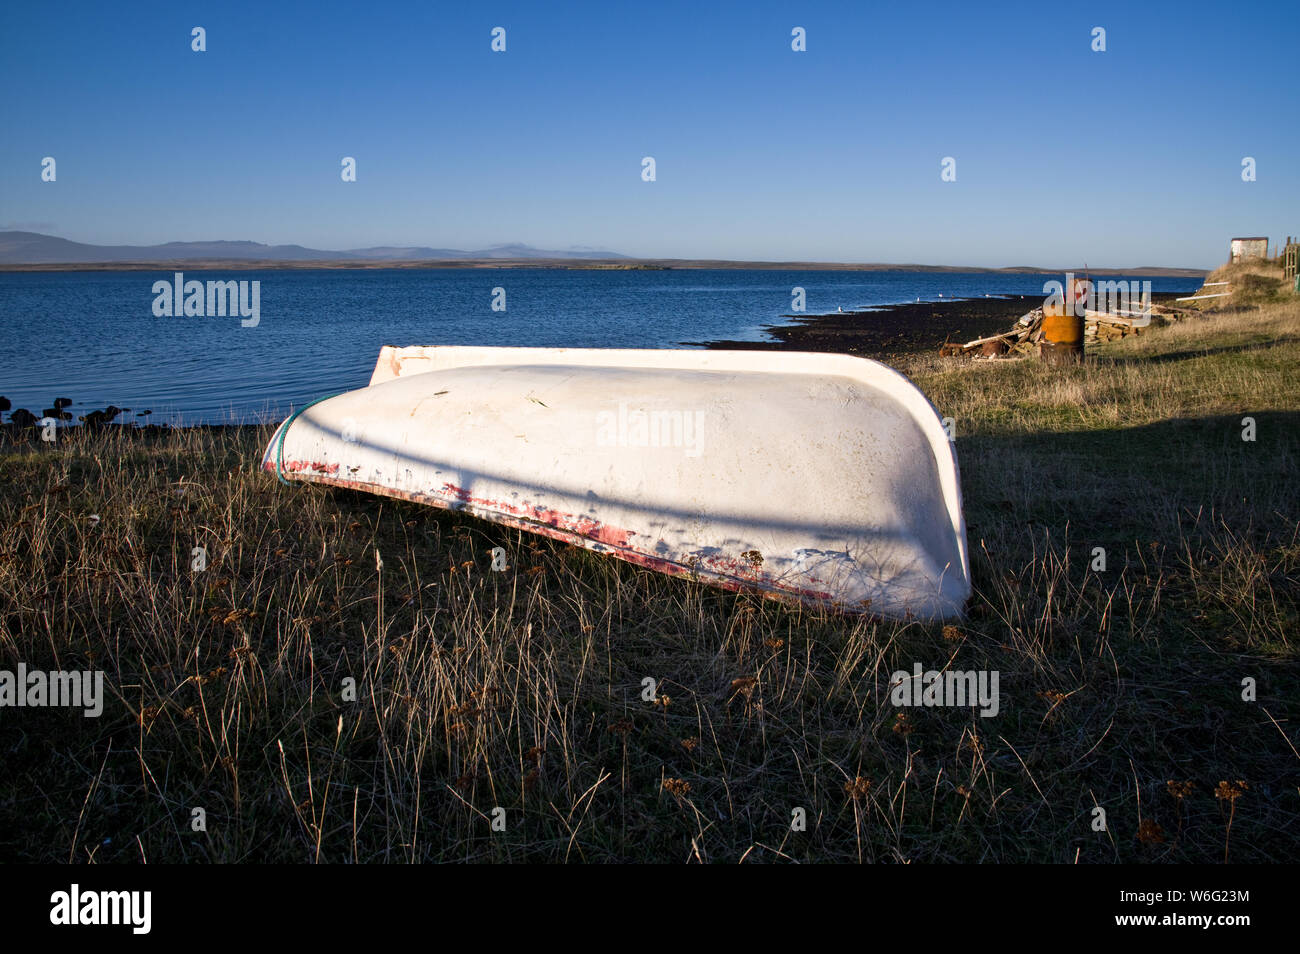 An upturned boat at Goose Green, the second largest settlement on the Falkland Islands. Stock Photo